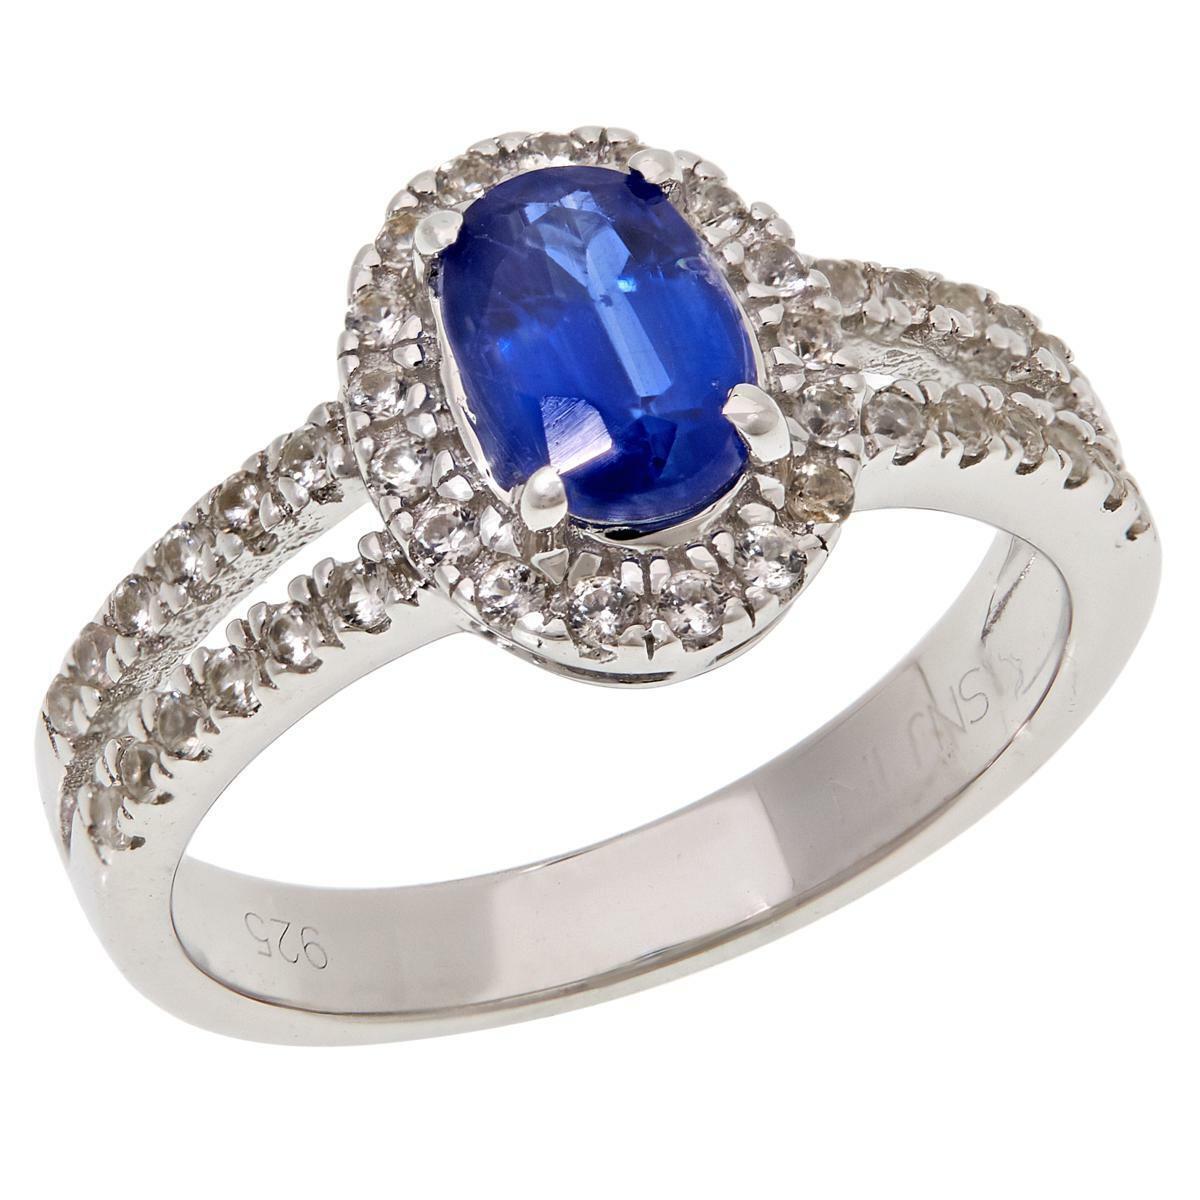 Colleen Lopez Sterling Silver Kyanite and White Zircon Halo Ring, Size 6